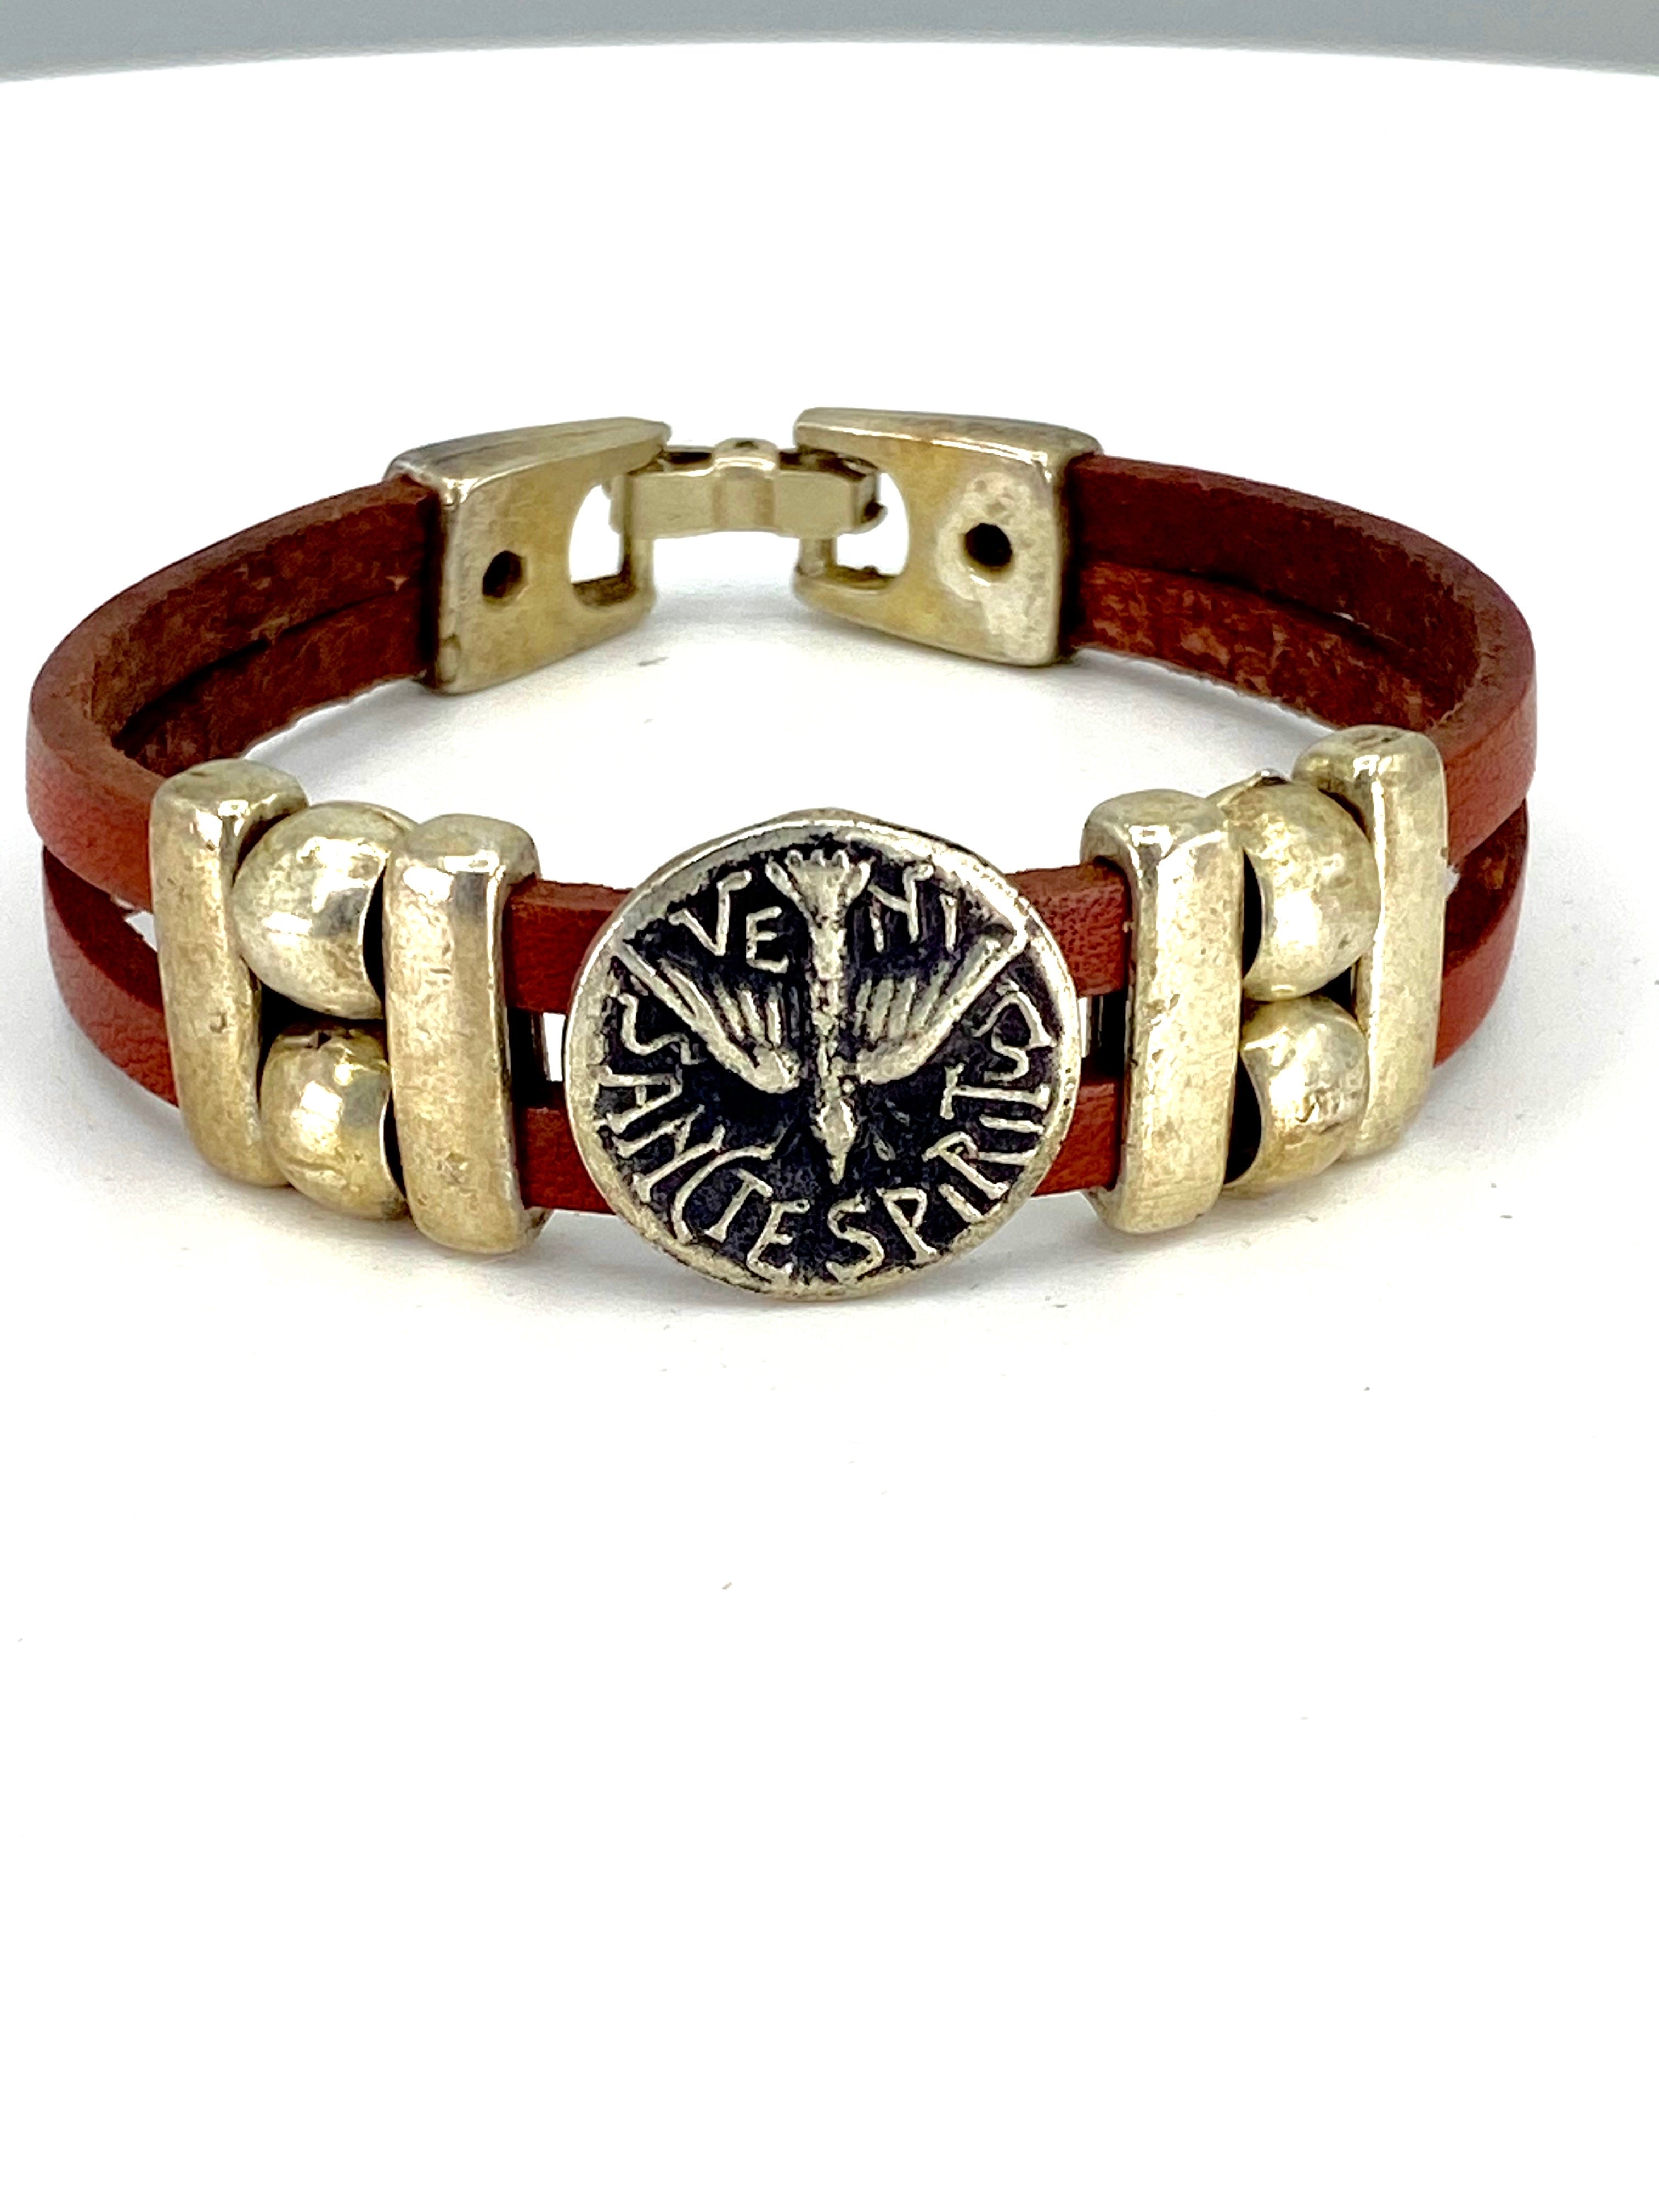 Vintage The Holy Spirit Bracelet handmade jewelry with Leather straps  by Graciela's Collection